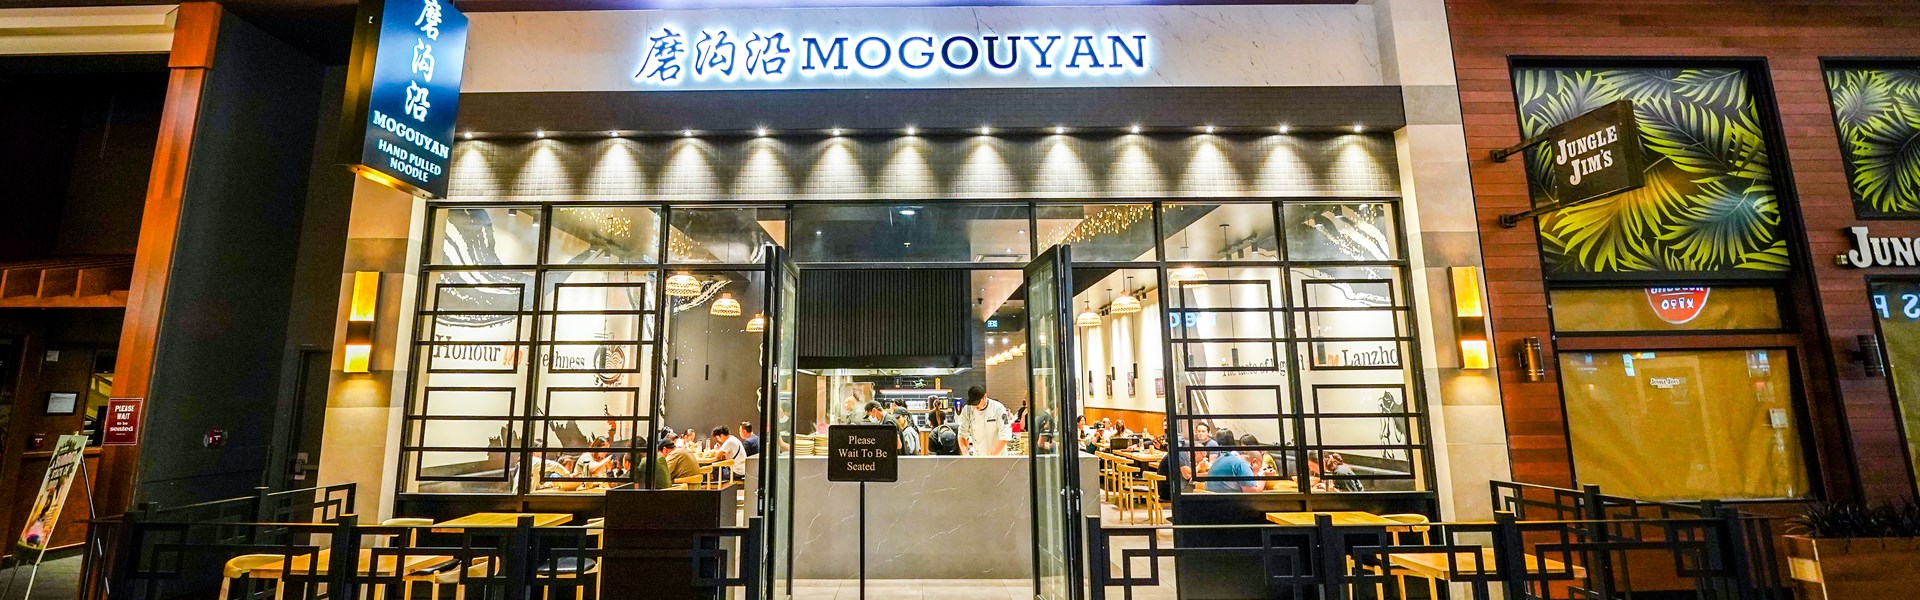 Mogouyan Hand Pulled Noodle